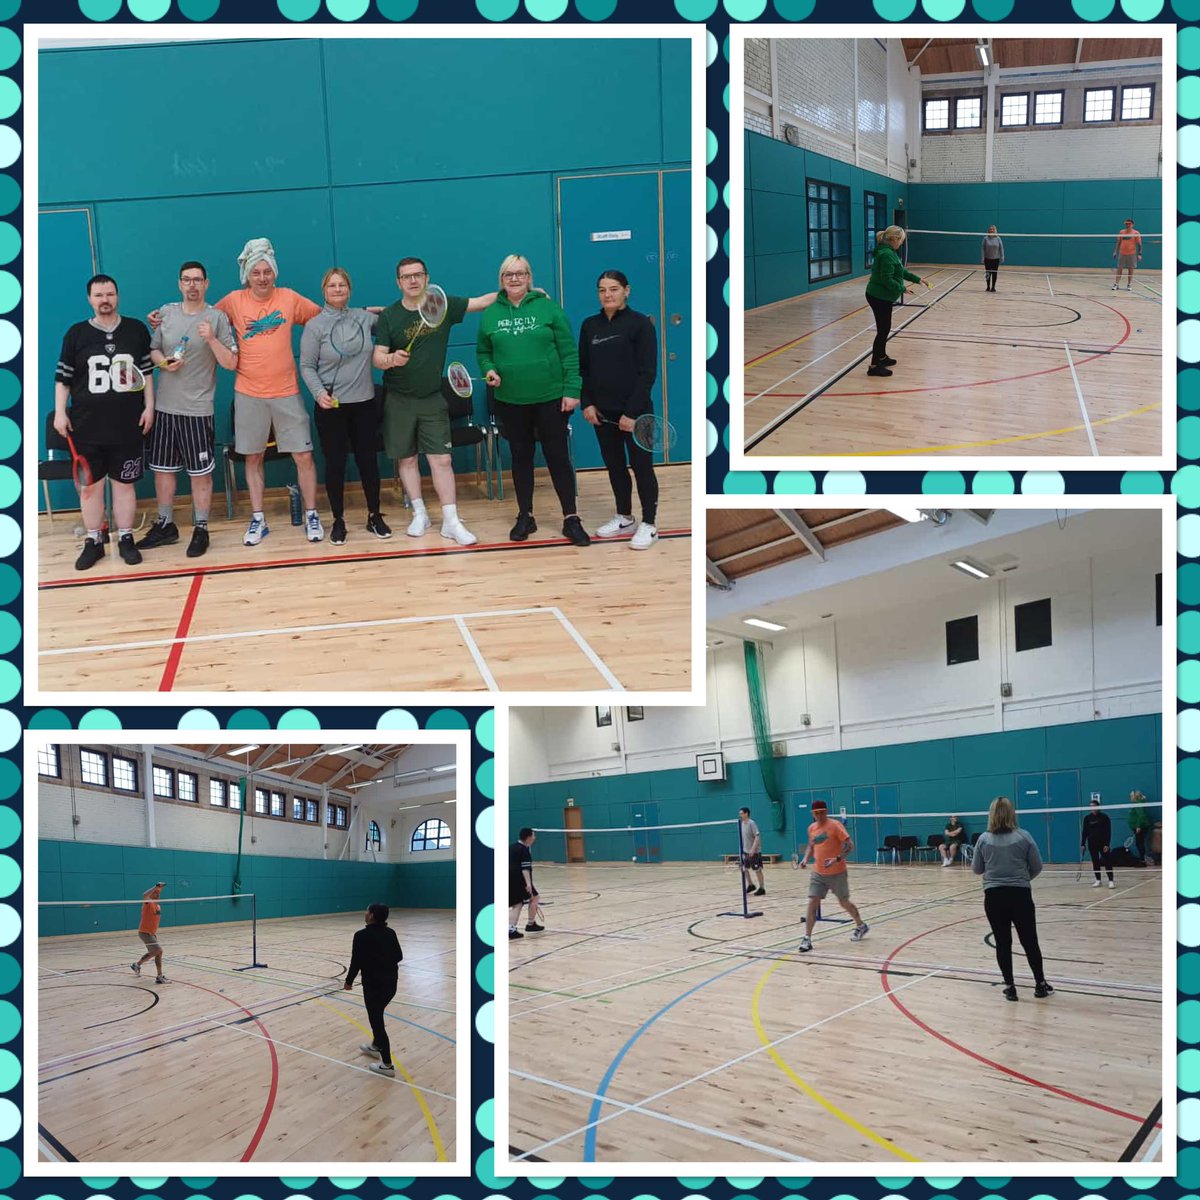 There was some good competition at our weekly Badminton class today in #Maryhill @glasgowlife Looking forward to next week 🤩 🏸